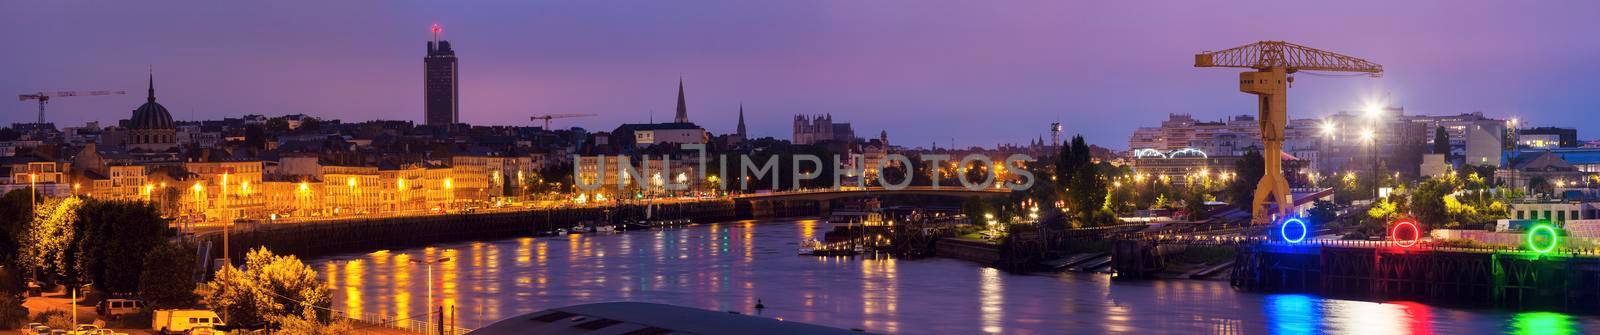 Sunrise in Nantes - panoramic view of the city by benkrut